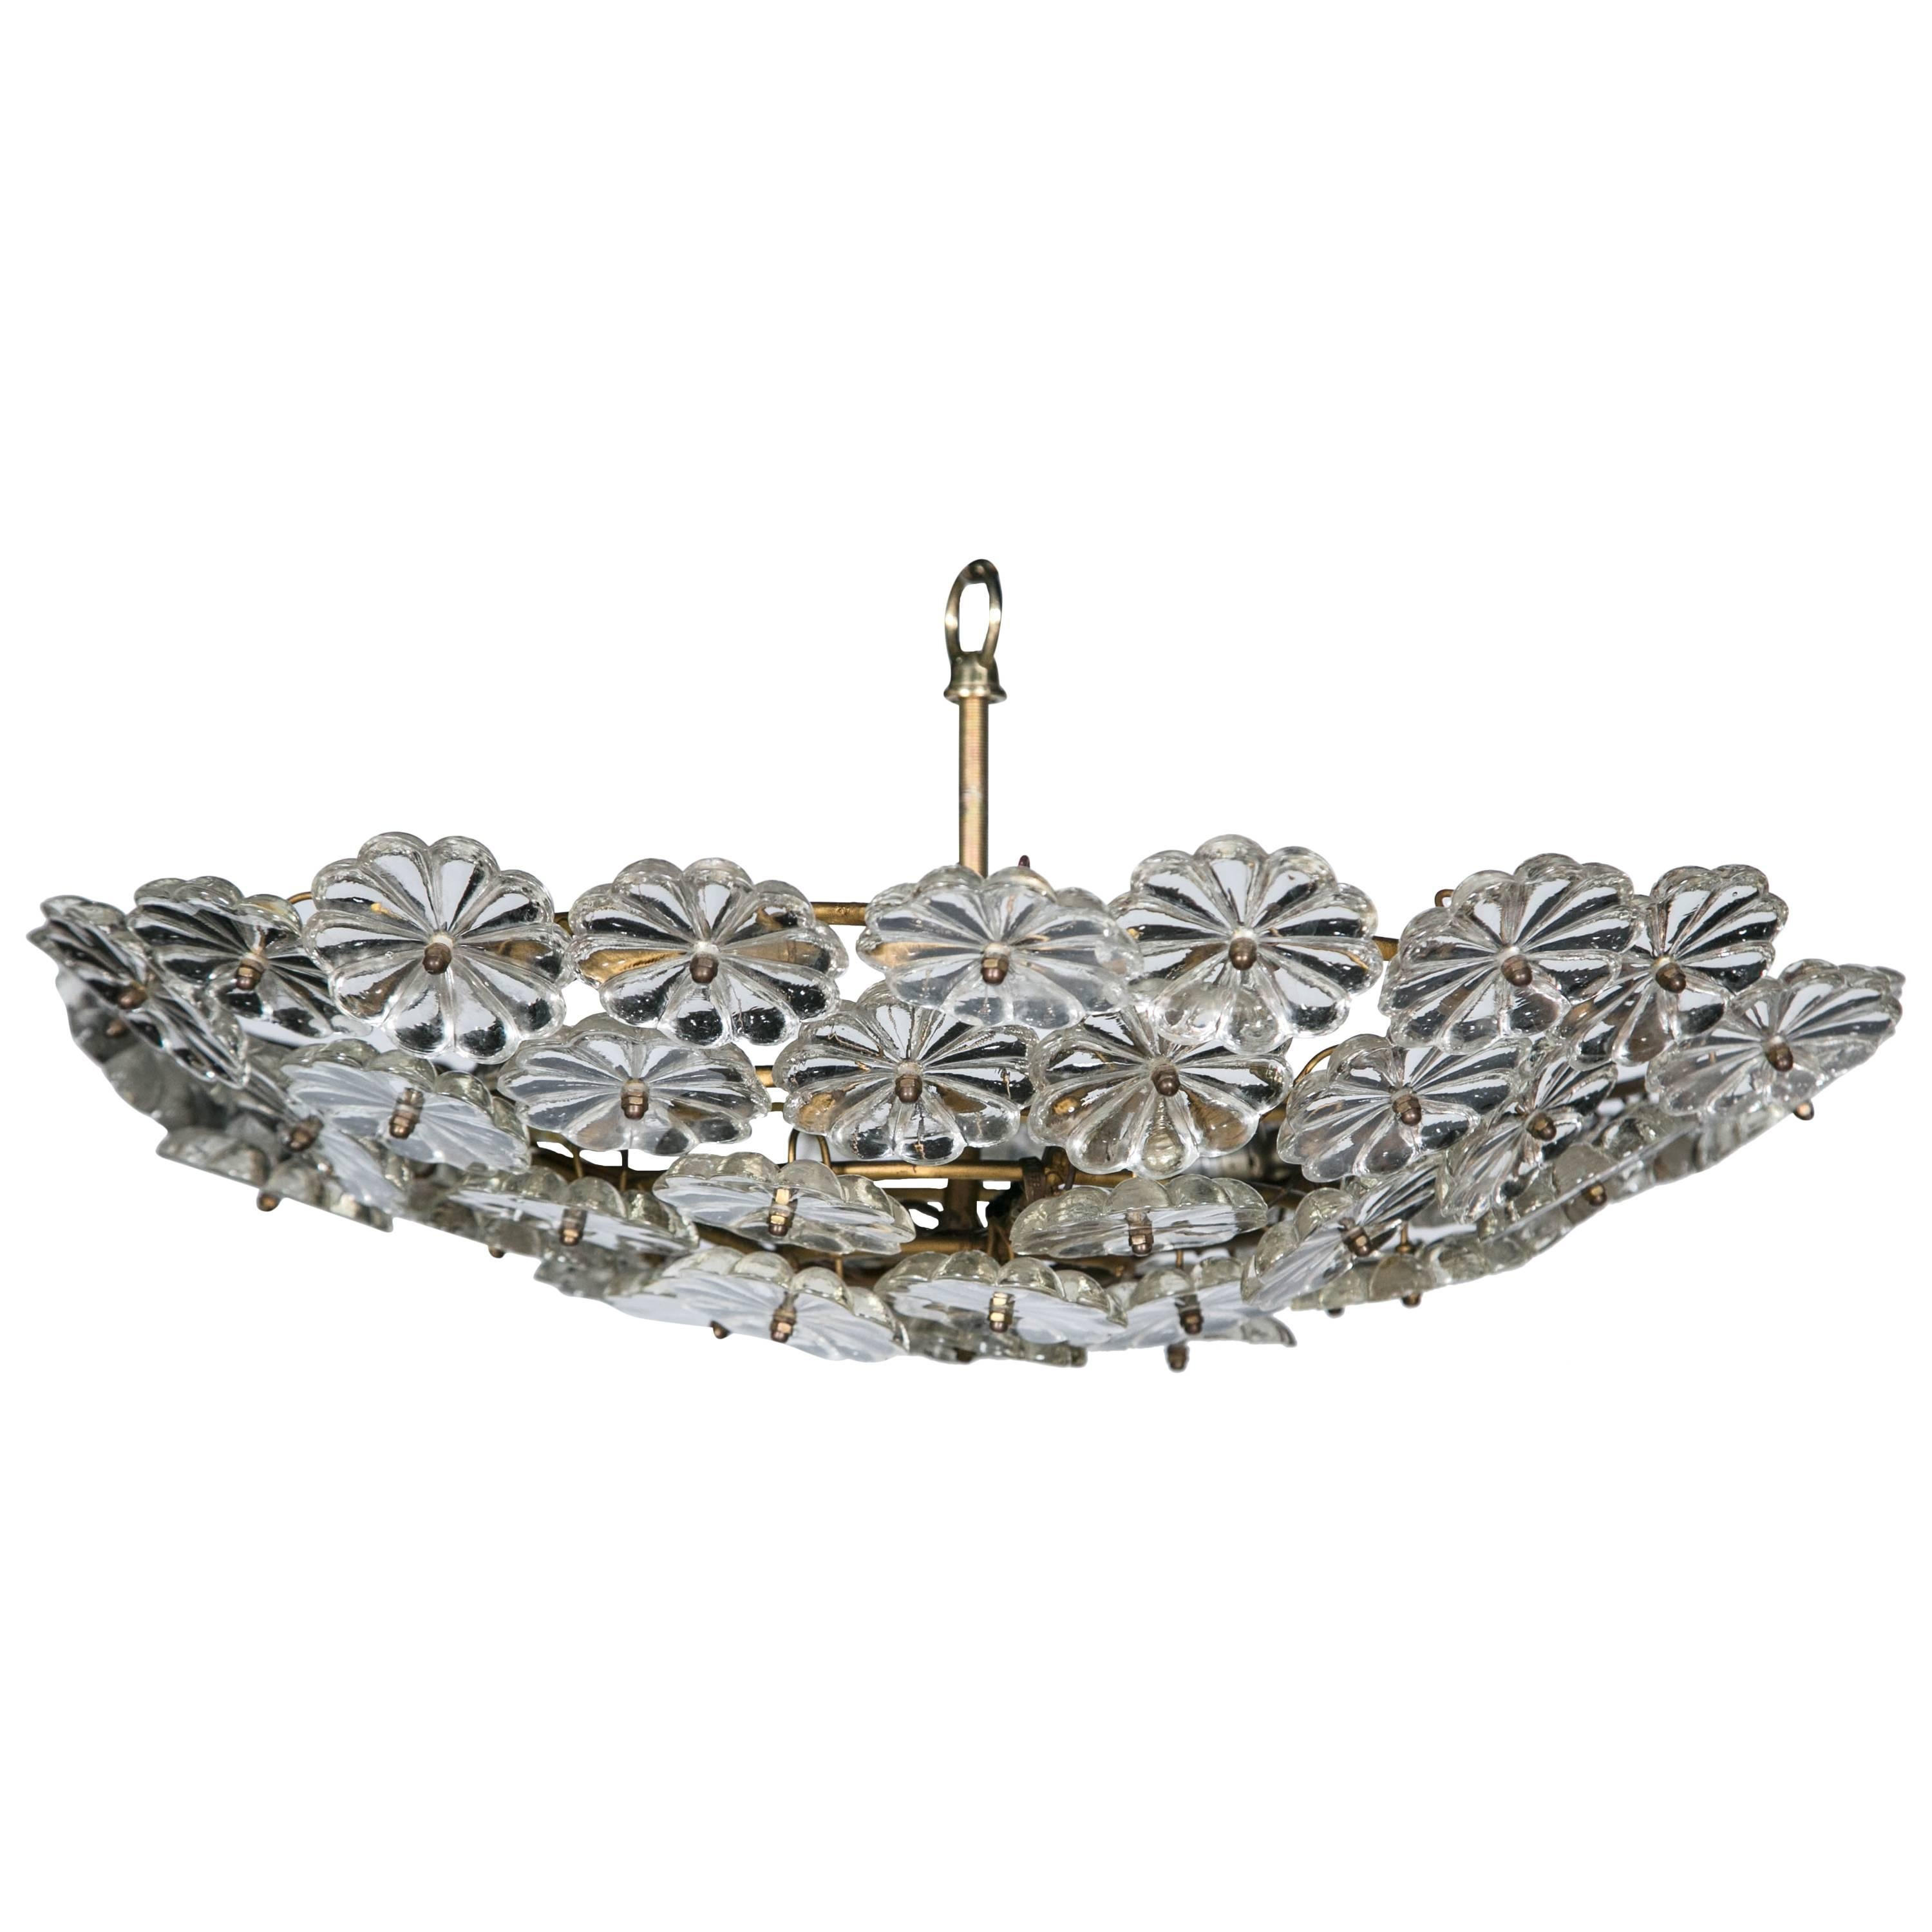 1930s French Light Fixture For Sale